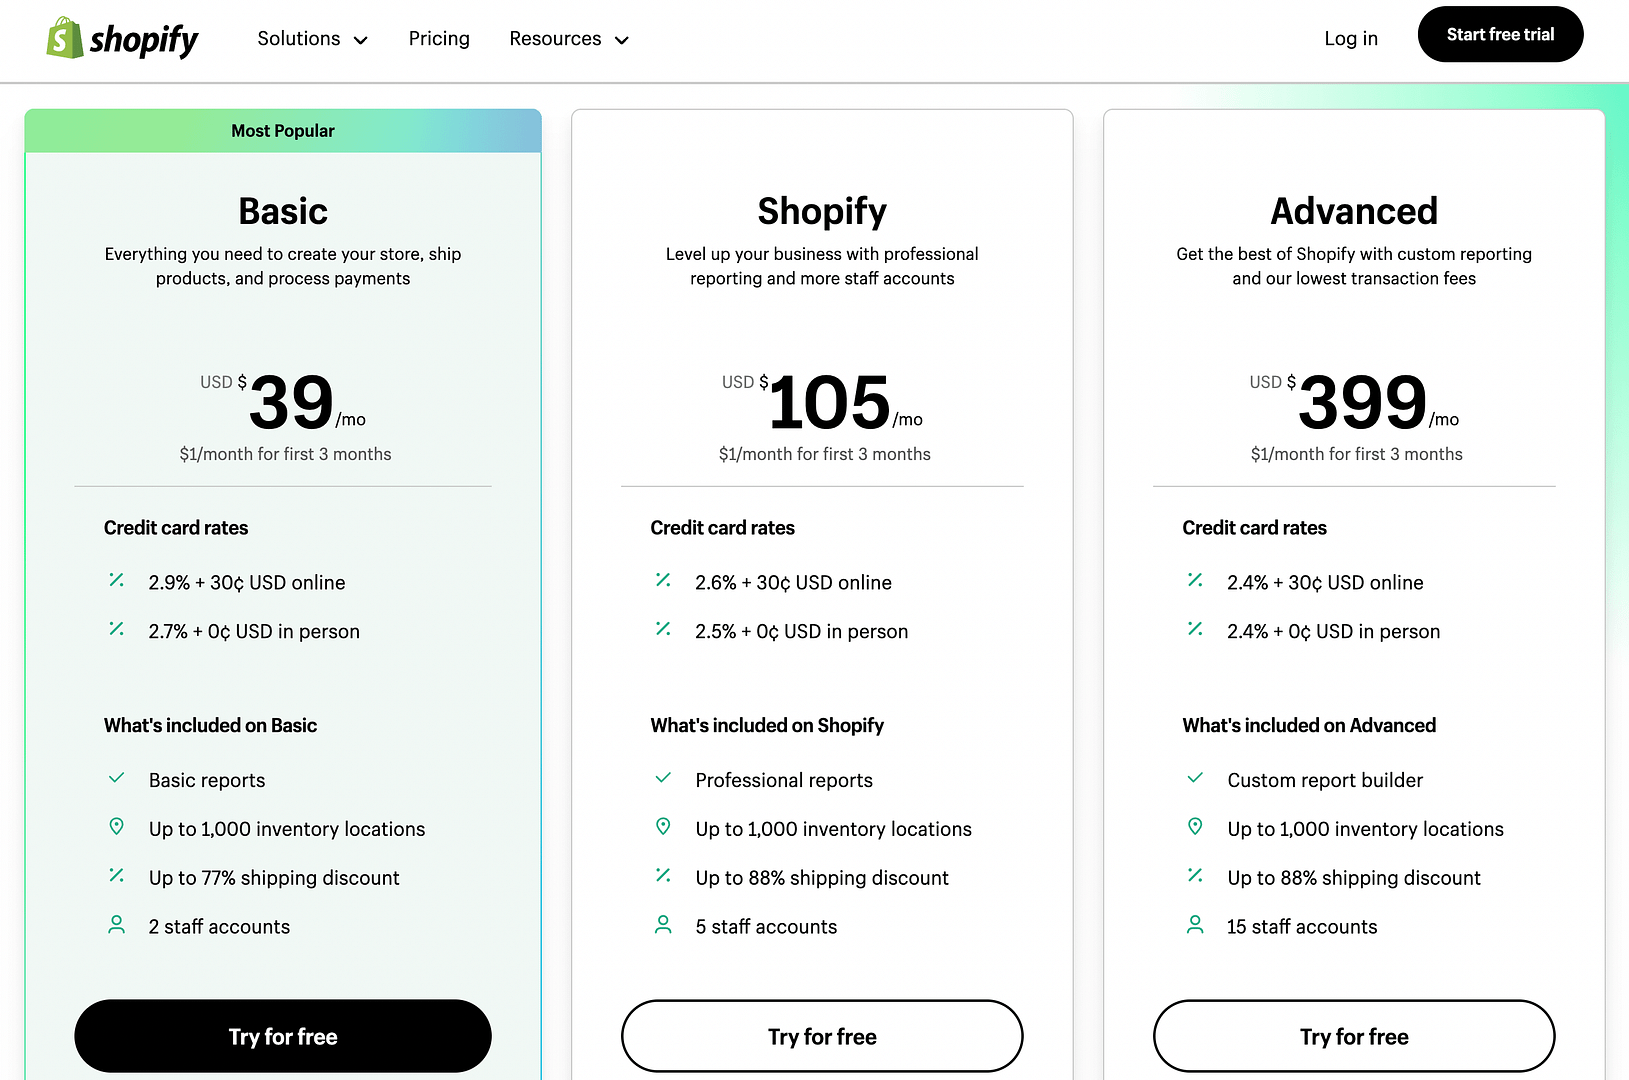 Shopify pricing: Basic plan for $39/month, Shopify plan for $105/month, Advanced plan for $399/month